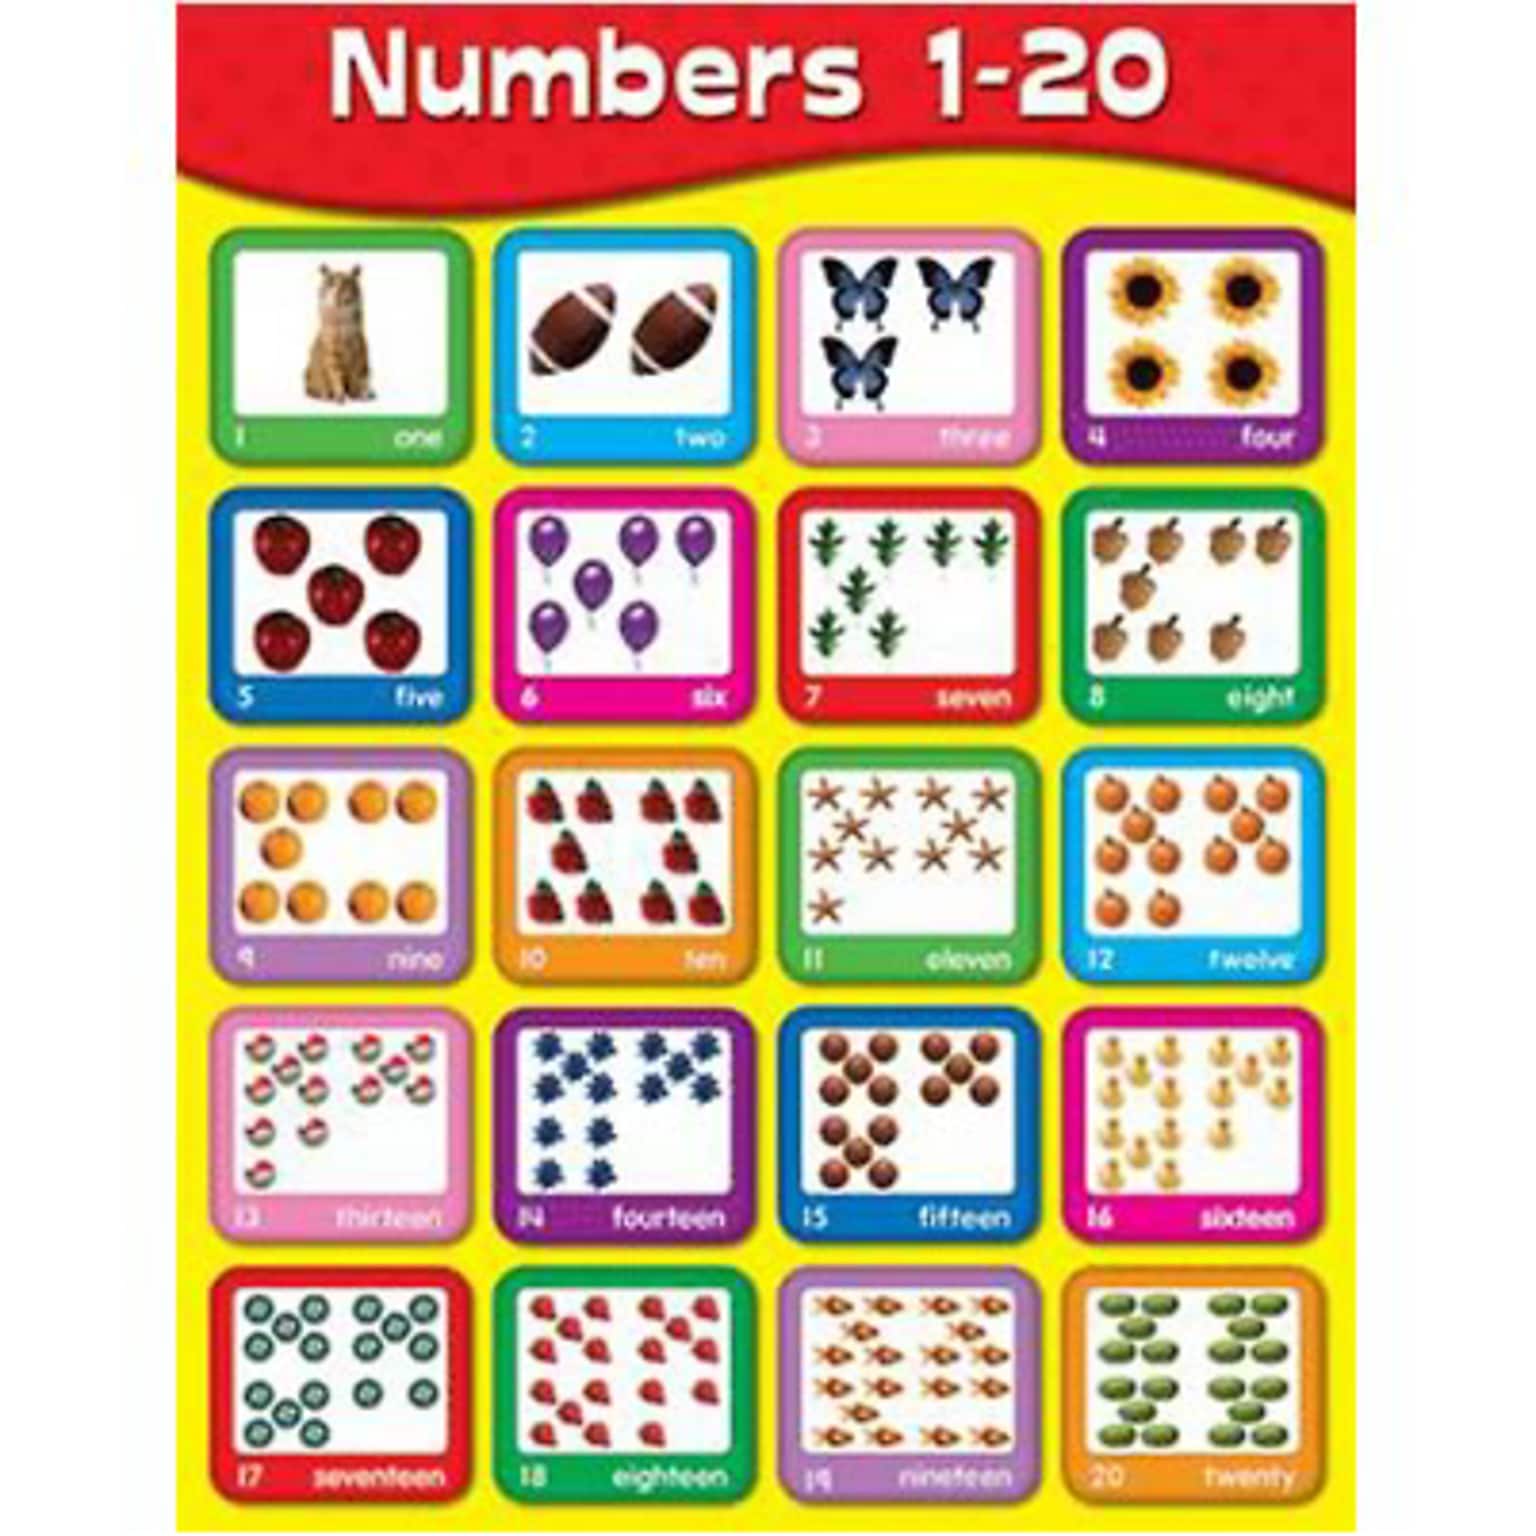 Numbers 1-20 Chartlet